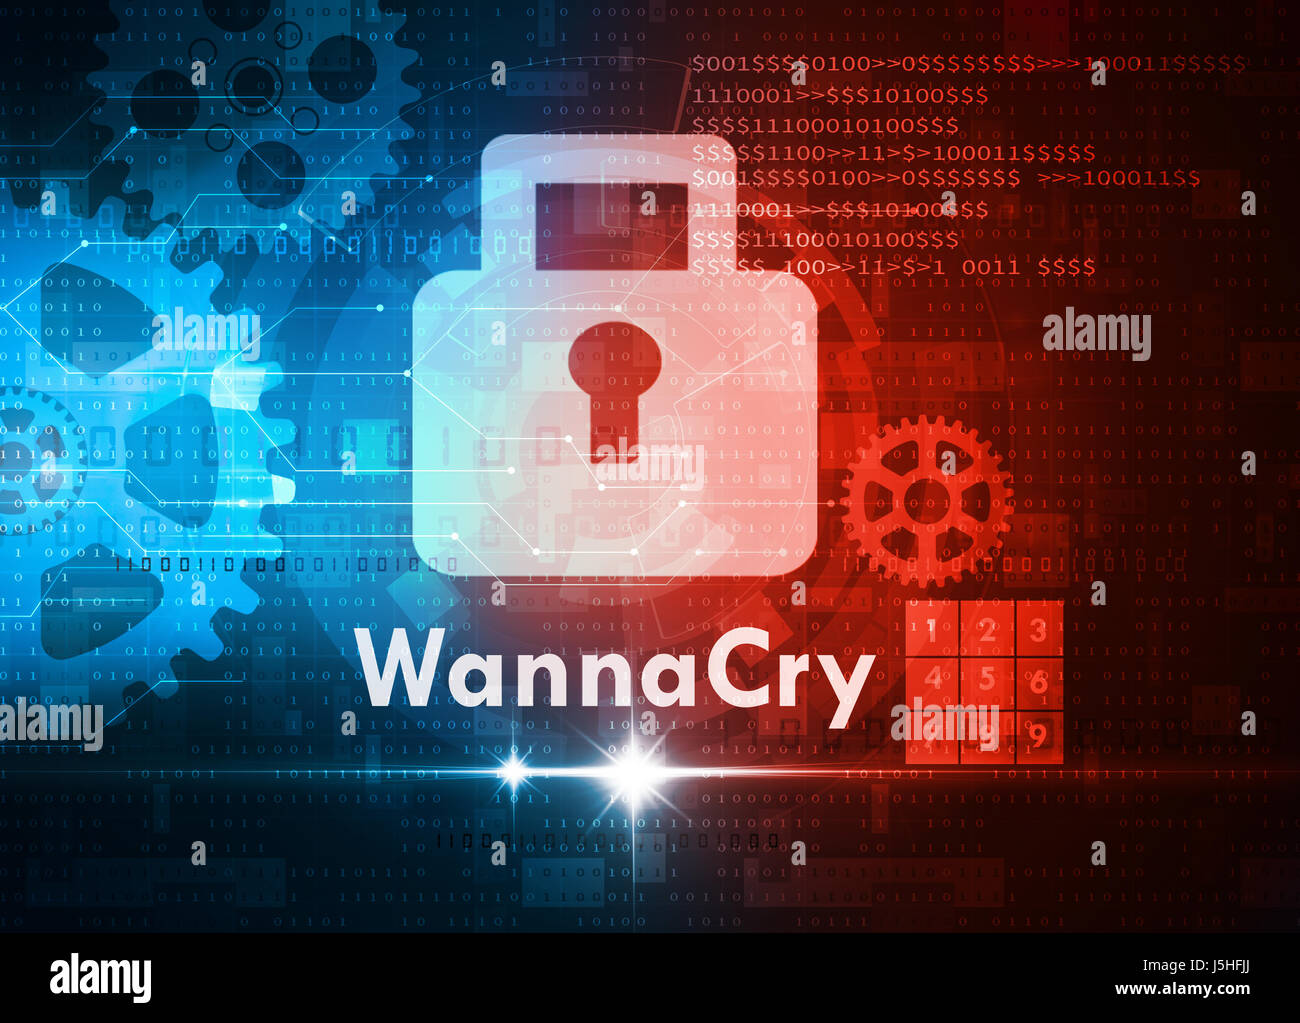 24302 Ransomware Images Stock Photos  Vectors  Shutterstock